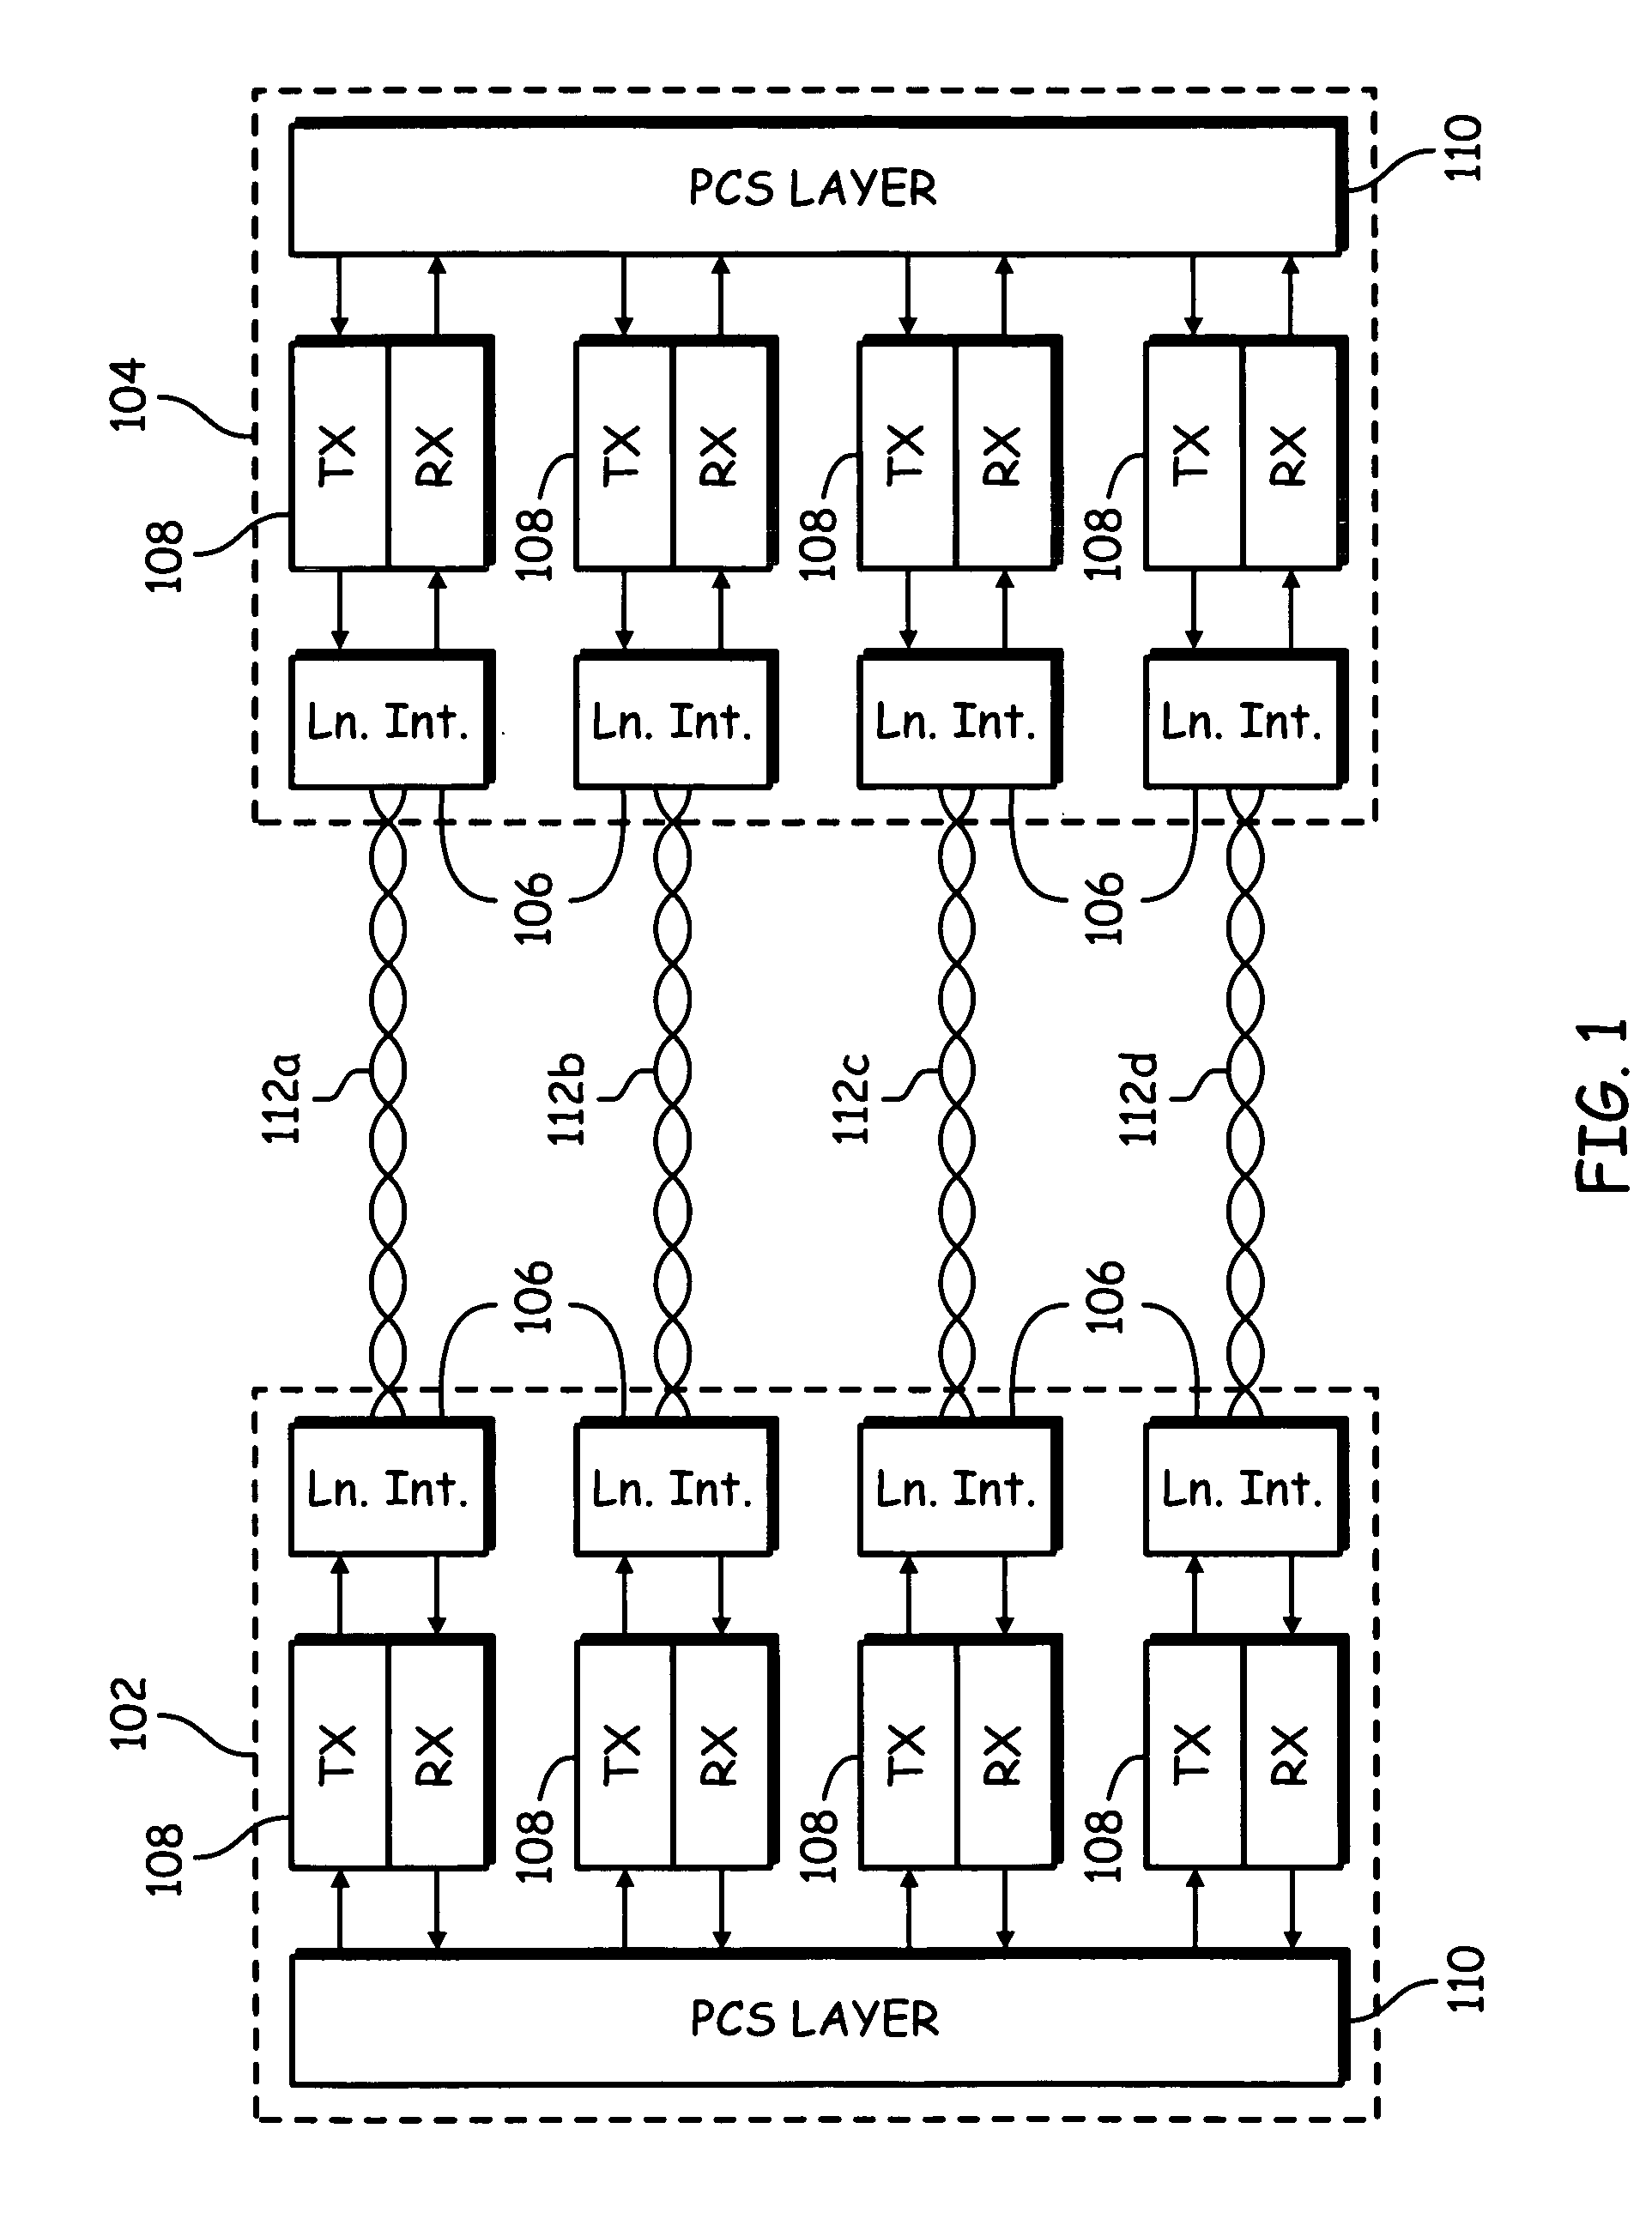 Phy control module for a multi-pair gigabit transceiver